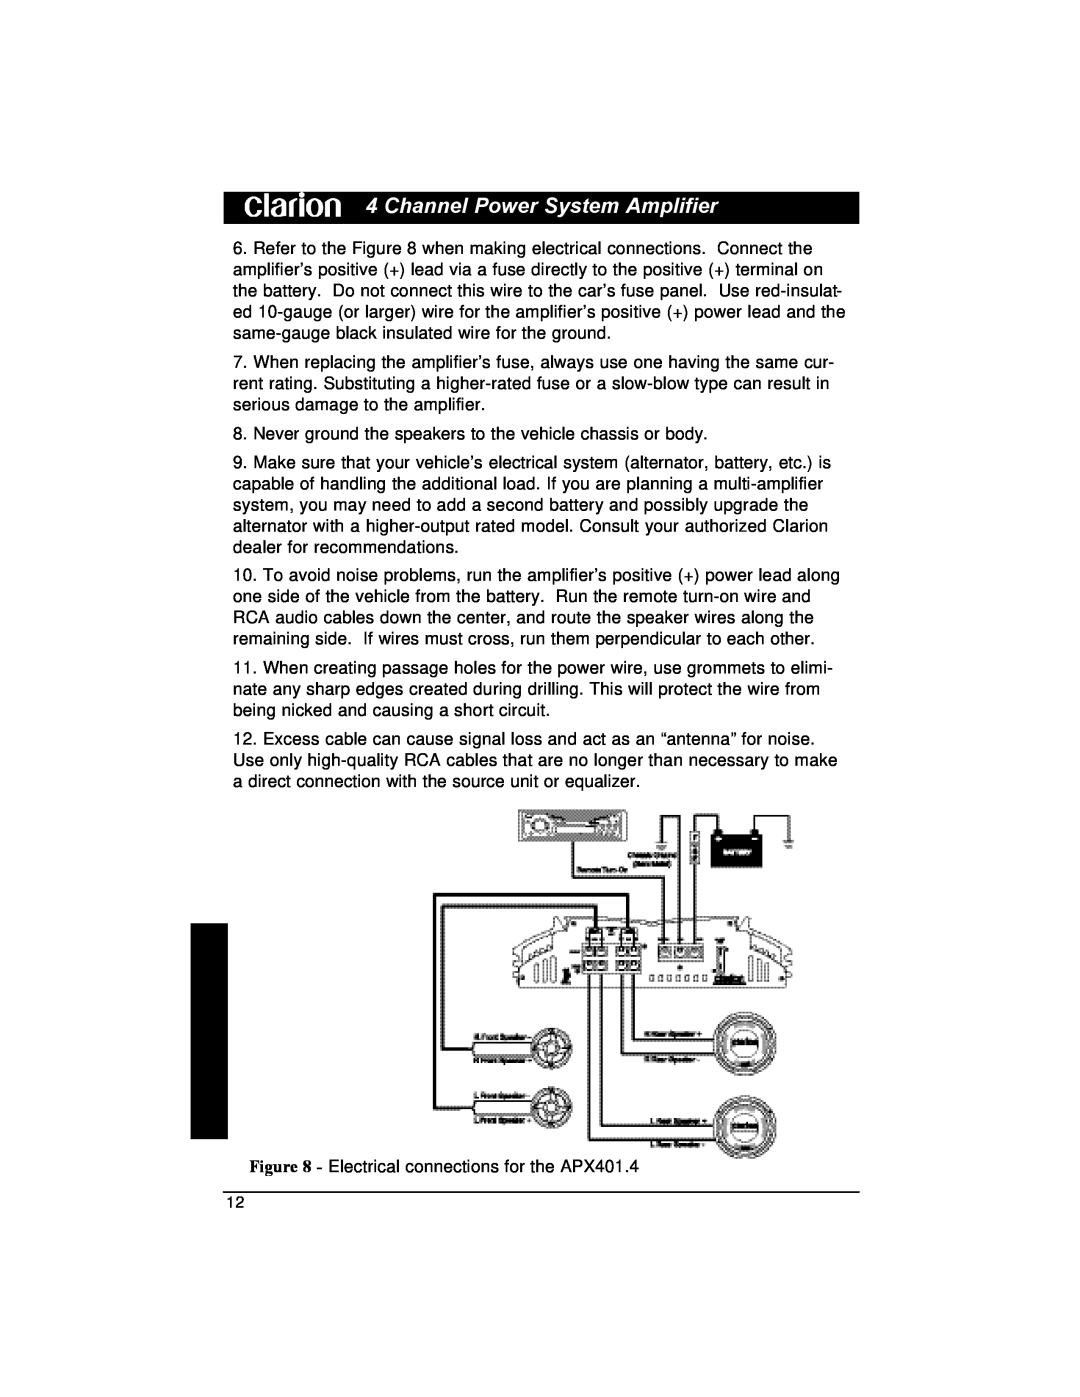 Clarion installation manual Channel Power System Amplifier, Electrical connections for the APX401.4 